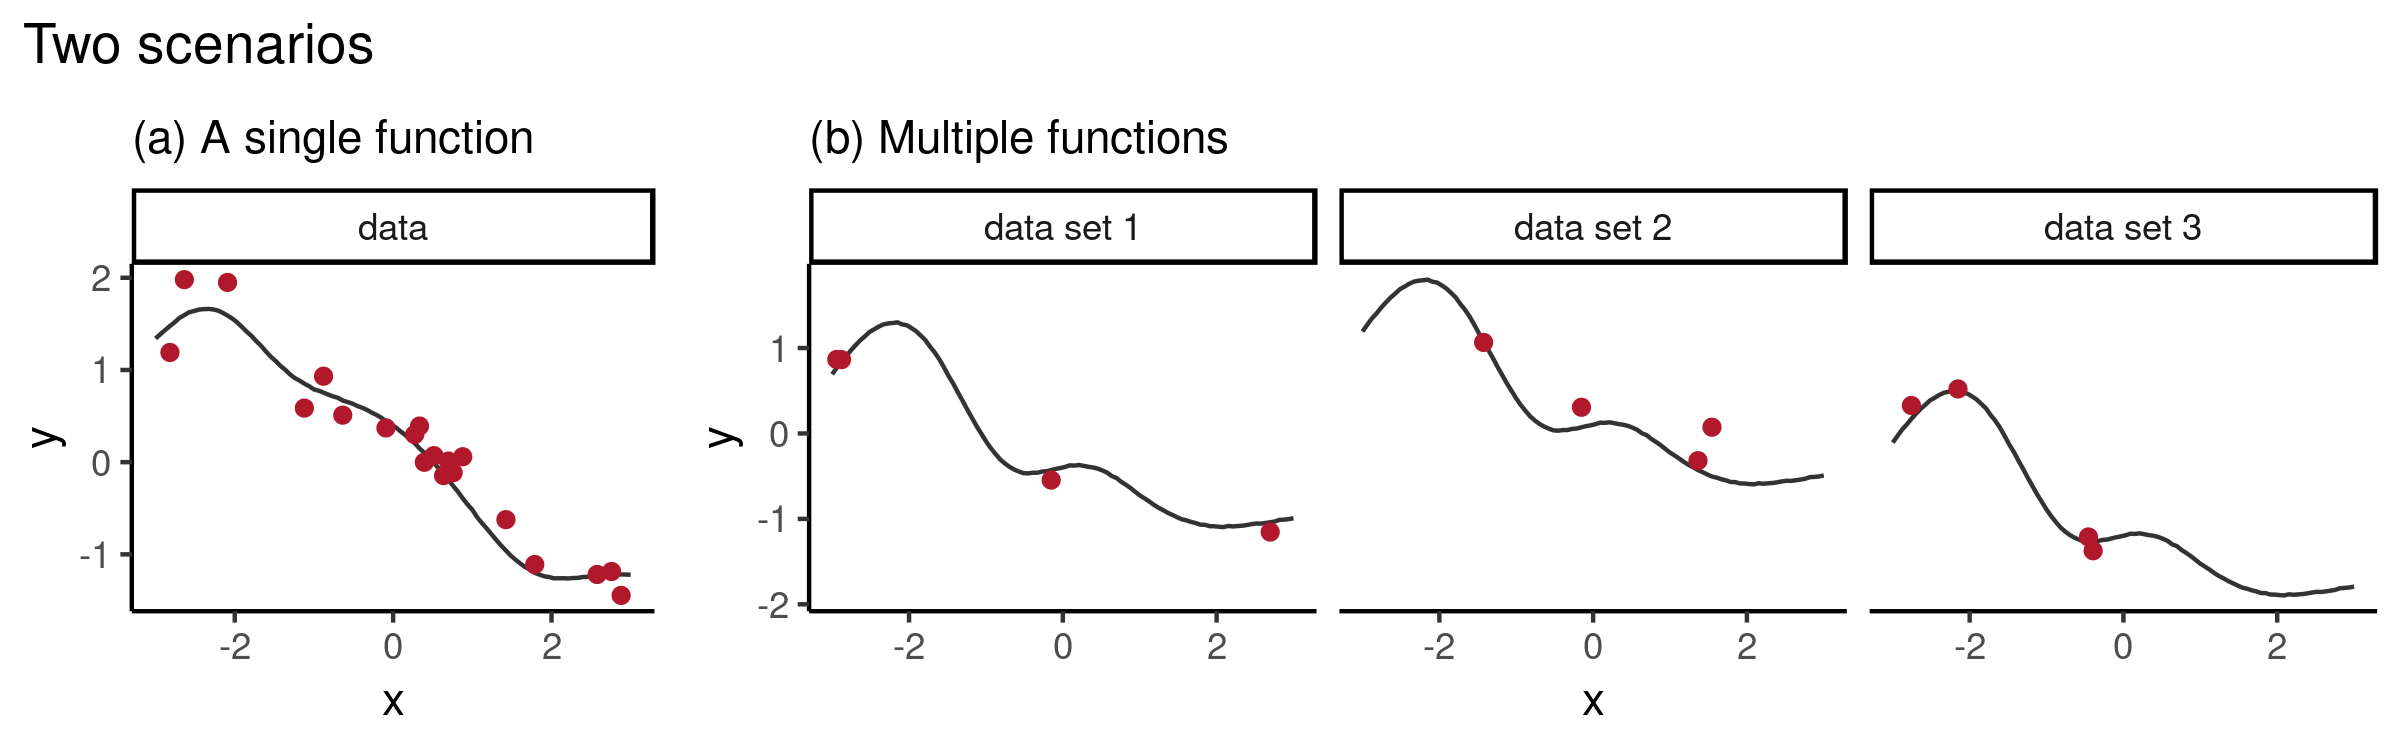 Figure 2: Conventional vs meta-learning for 1D function regression (image source)